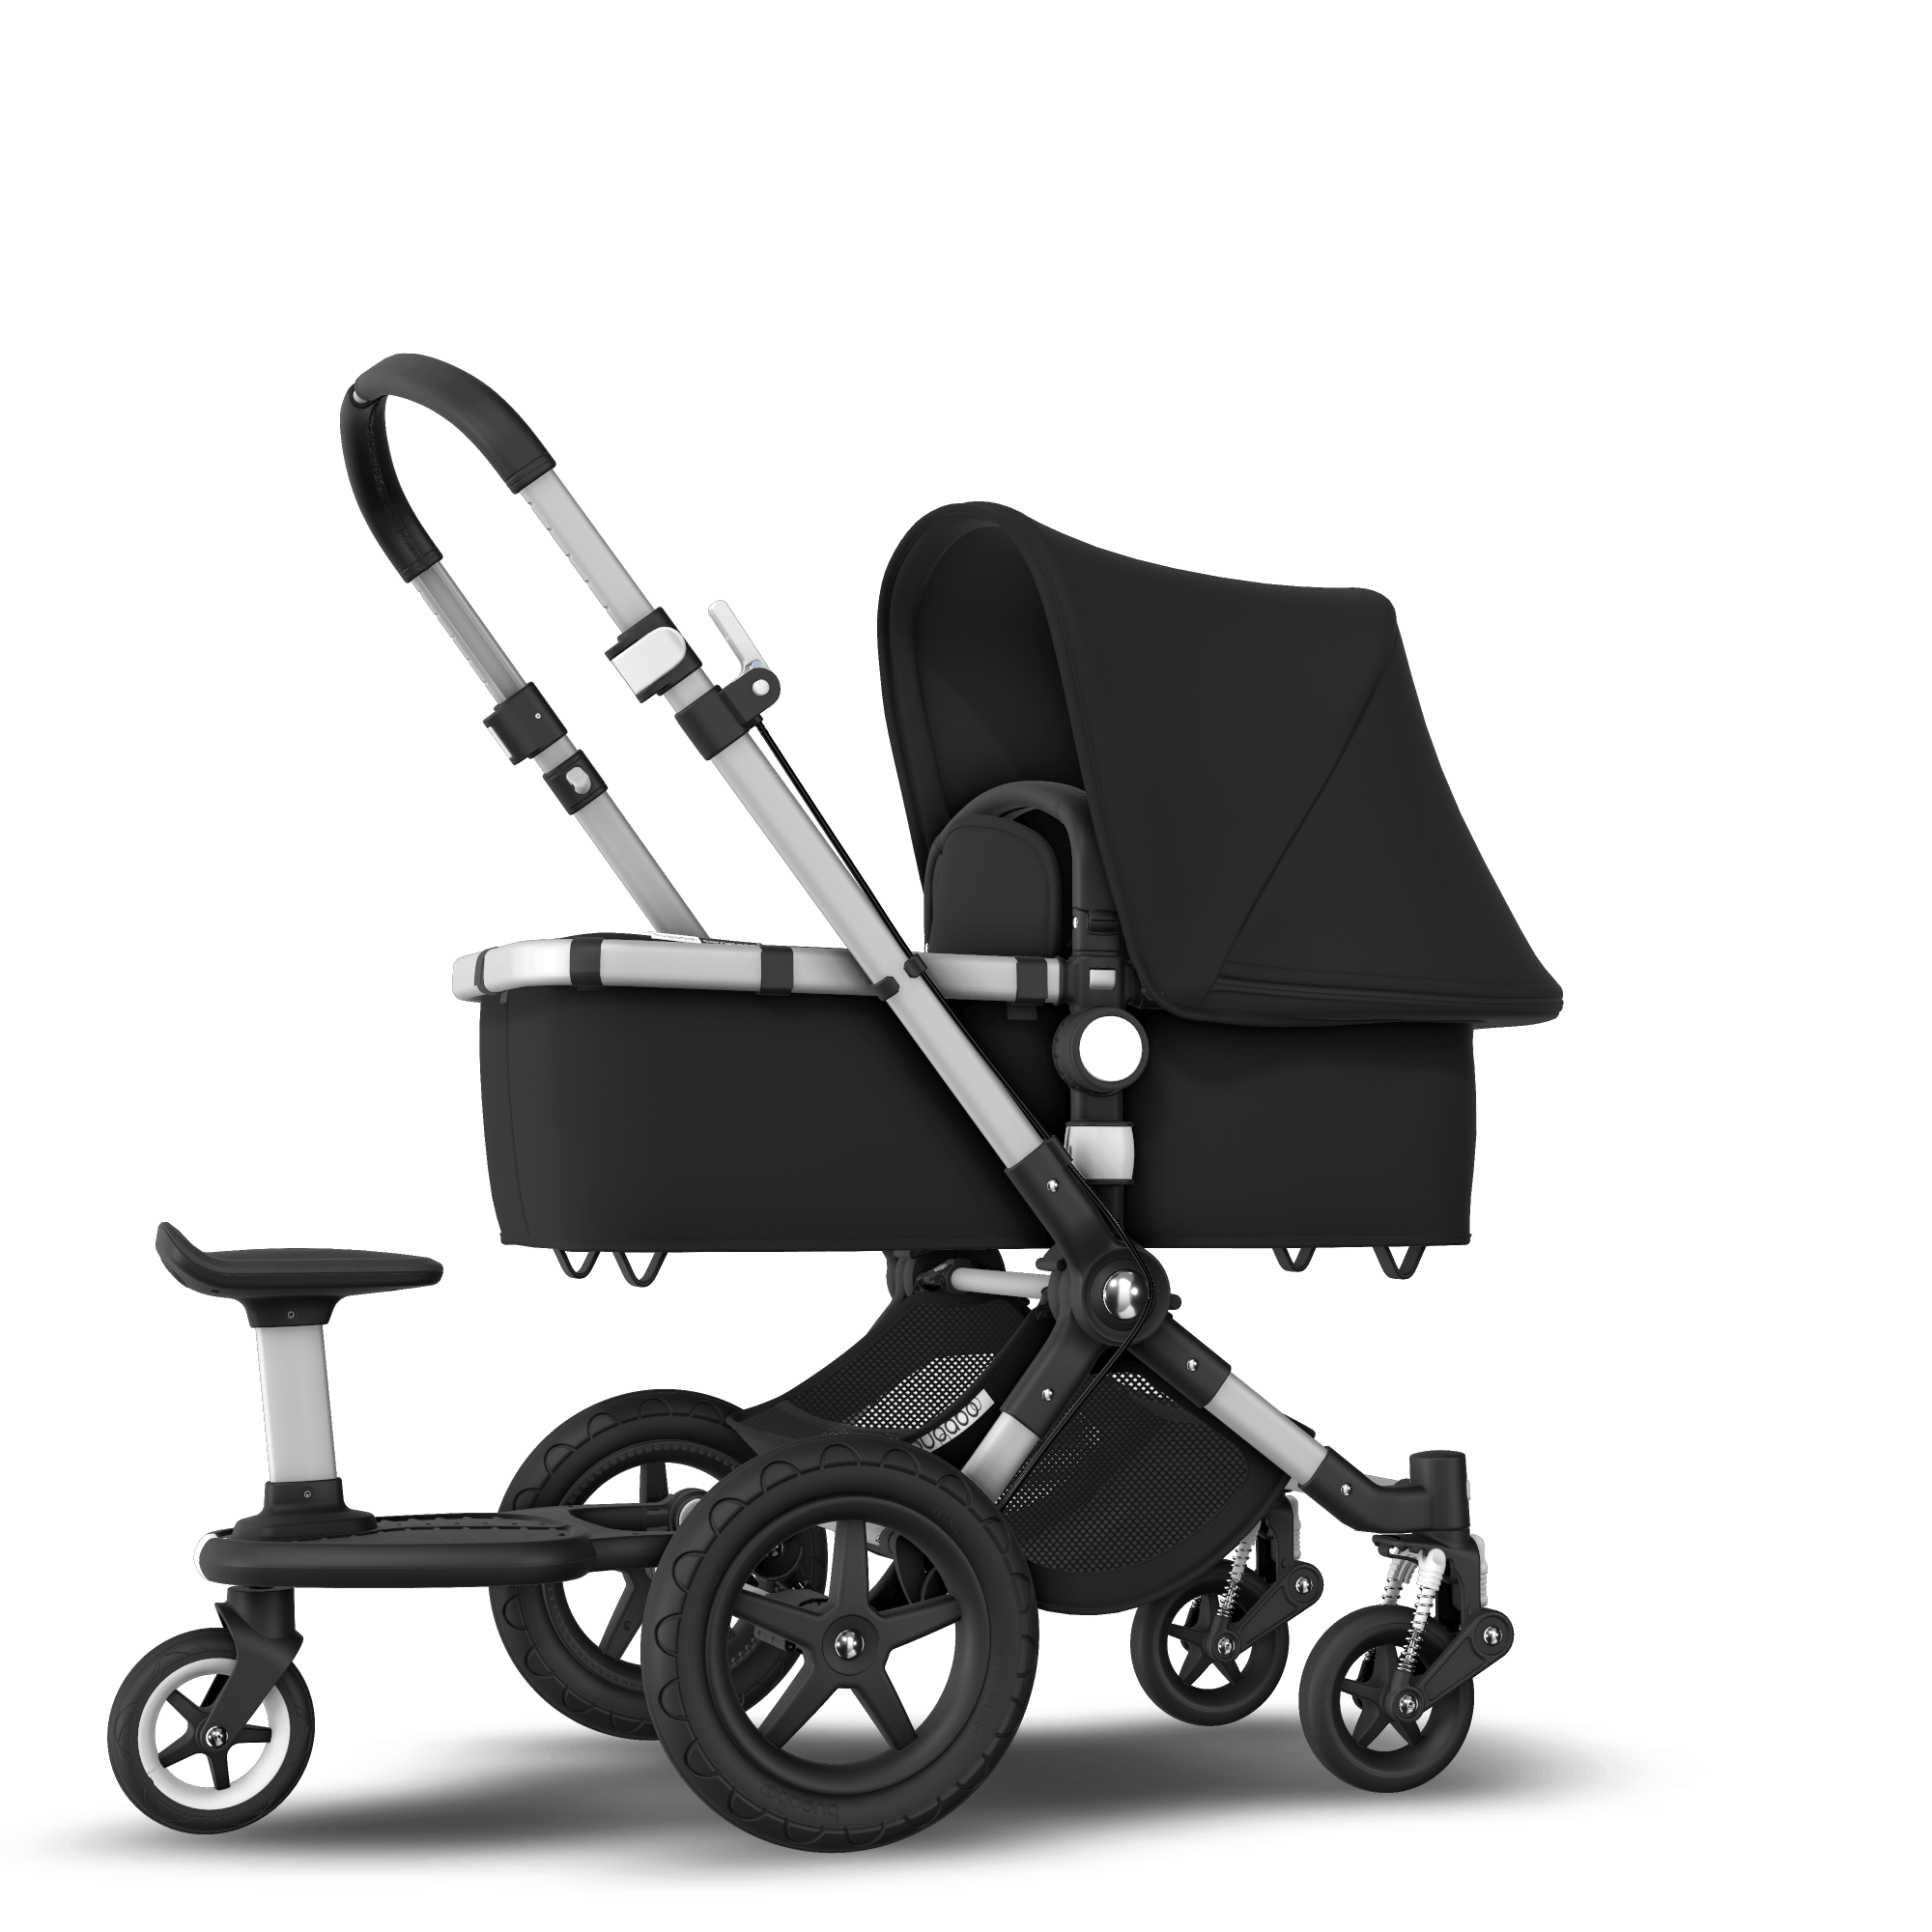 Bugaboo Cameleon 3 Sit and stand stroller Black sun canopy, black fabrics, aluminum chassis Bugaboo